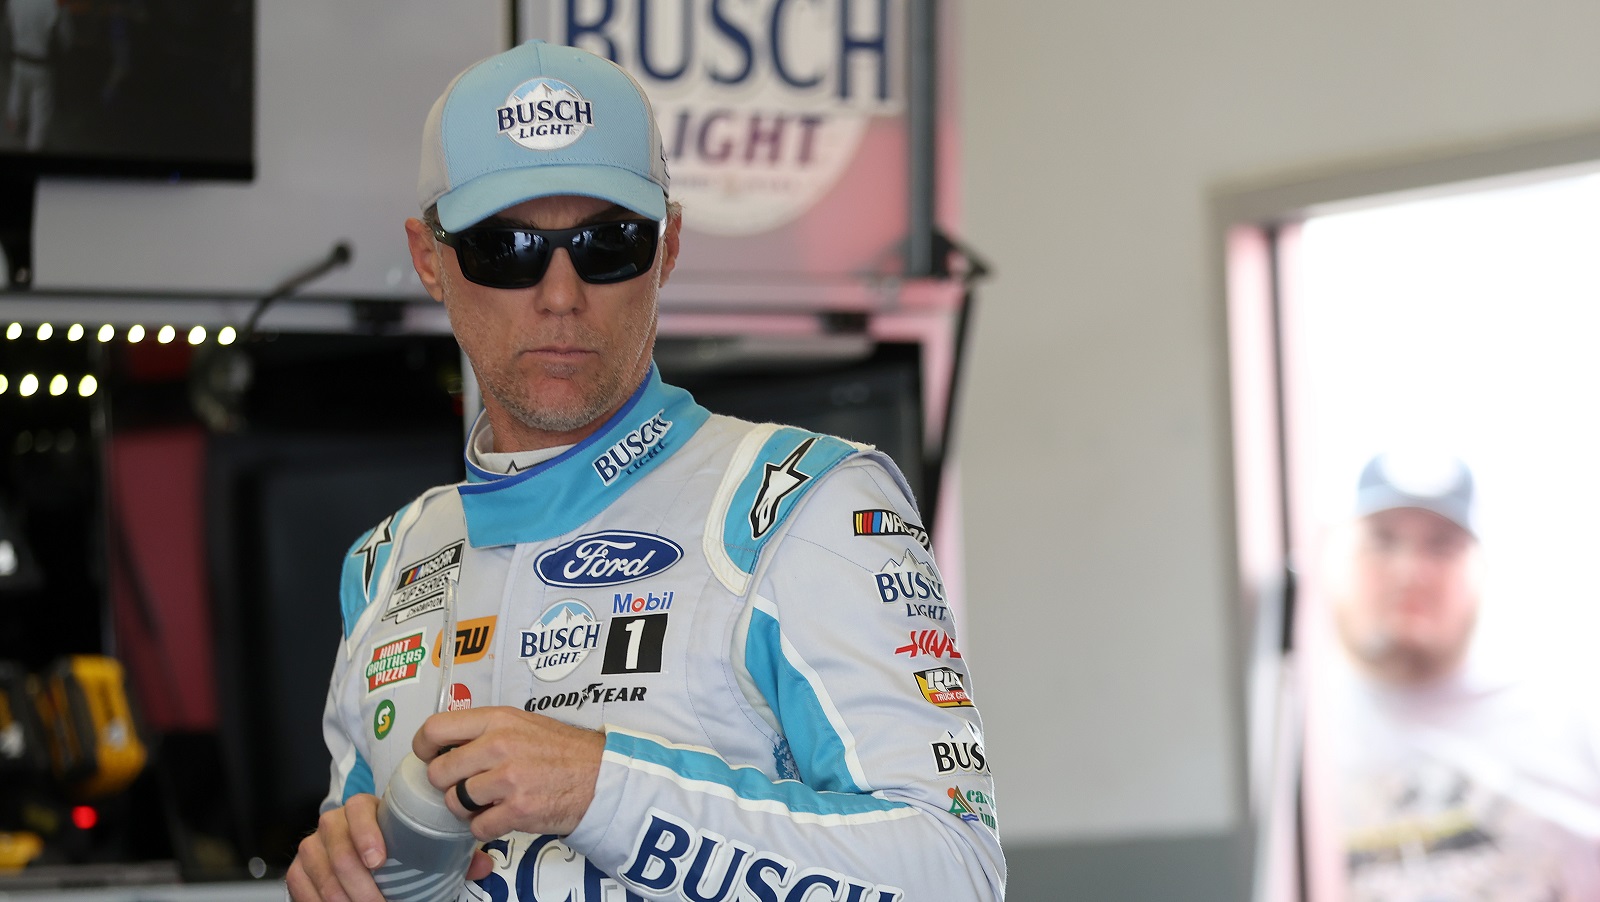 Kevin Harvick, driver of the No. 4 Ford, waits in the garage area during practice for the NASCAR Cup Series Daytona 500 at Daytona International Speedway on Feb. 18, 2022. | James Gilbert/Getty Images